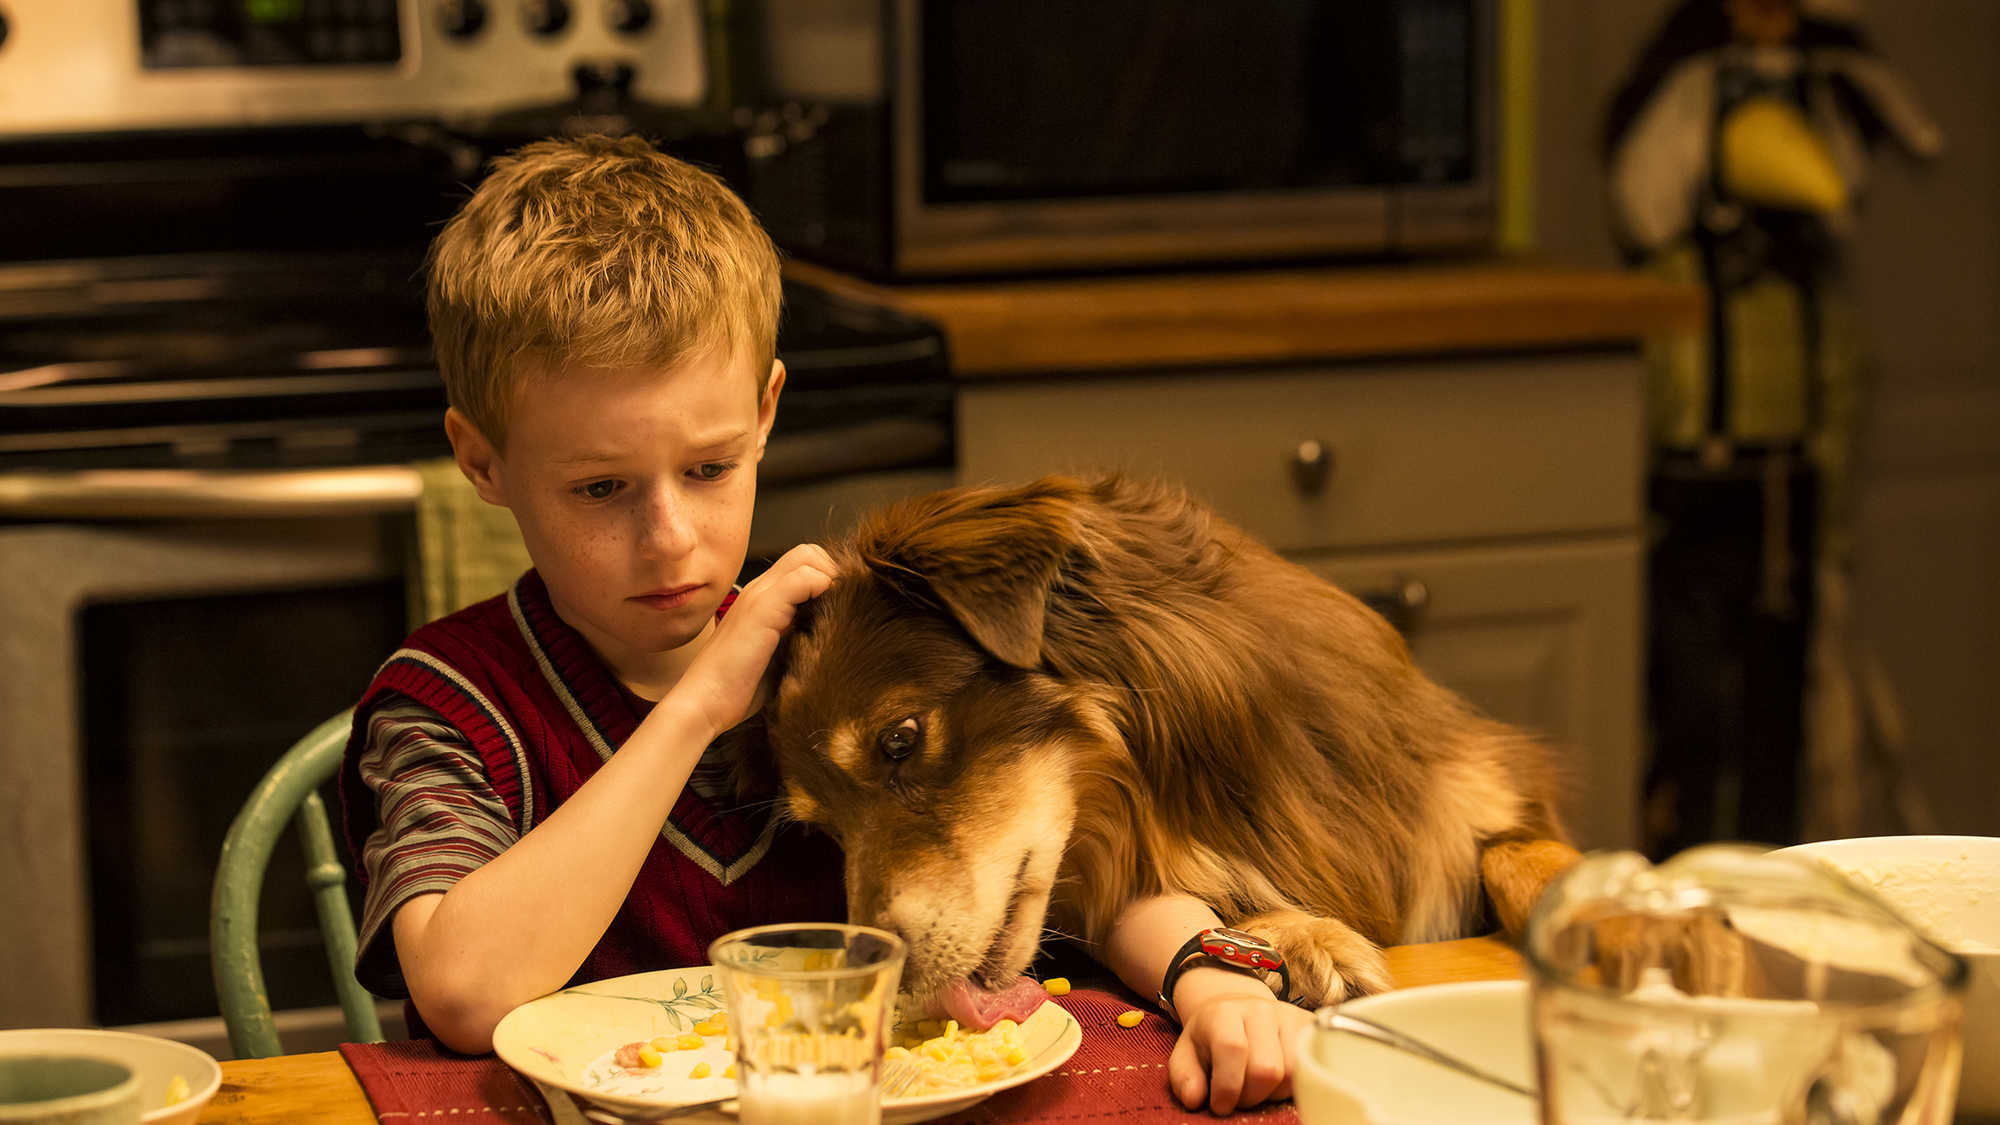 The Young and Prodigious T.S. Spivet 3D (image 16)